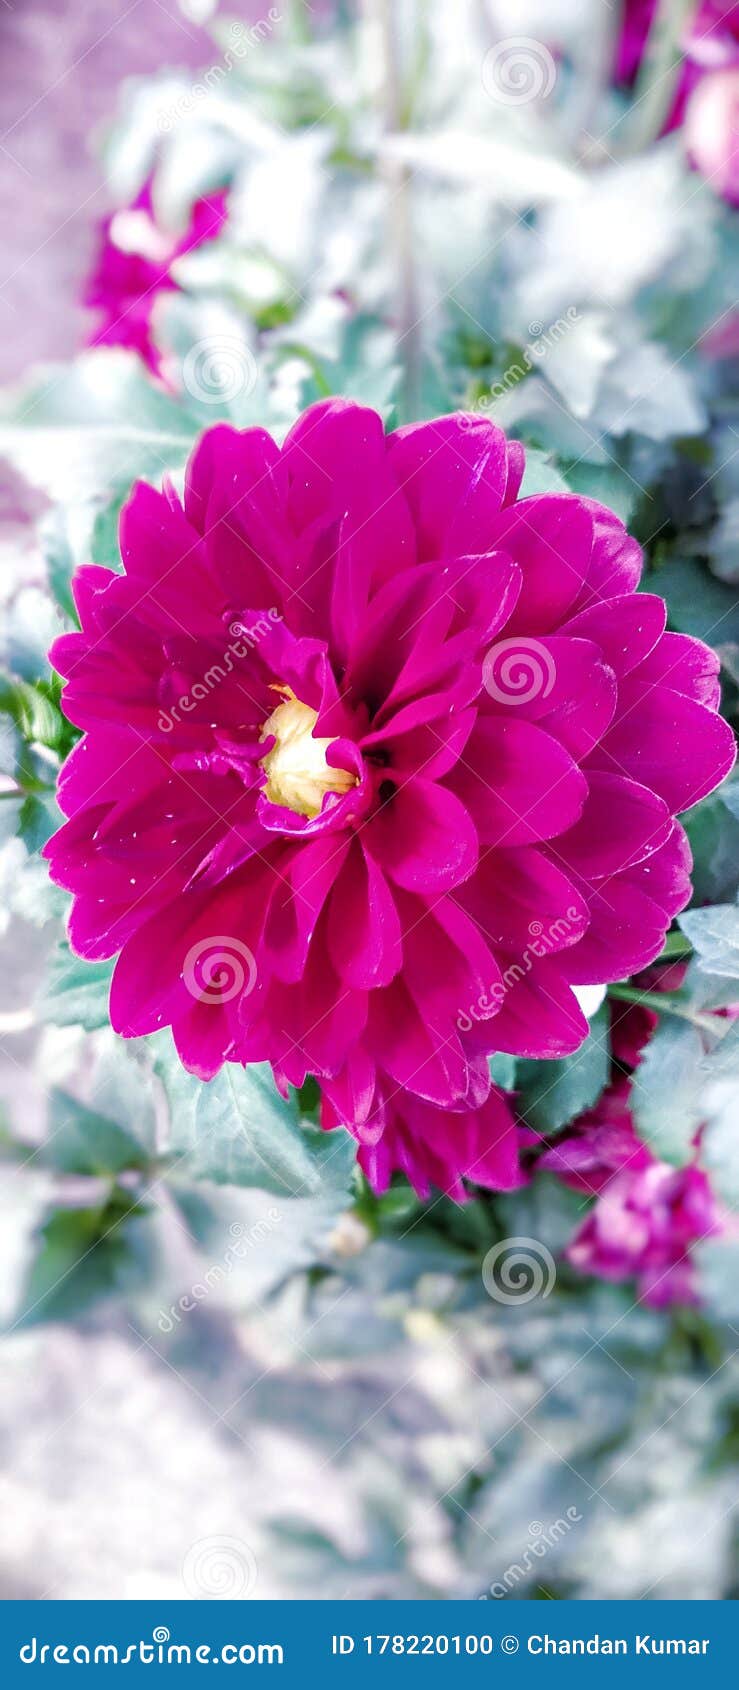 Beautyful Pink Dahlia Flower Images Stock Photo Image Of Natural Bigest